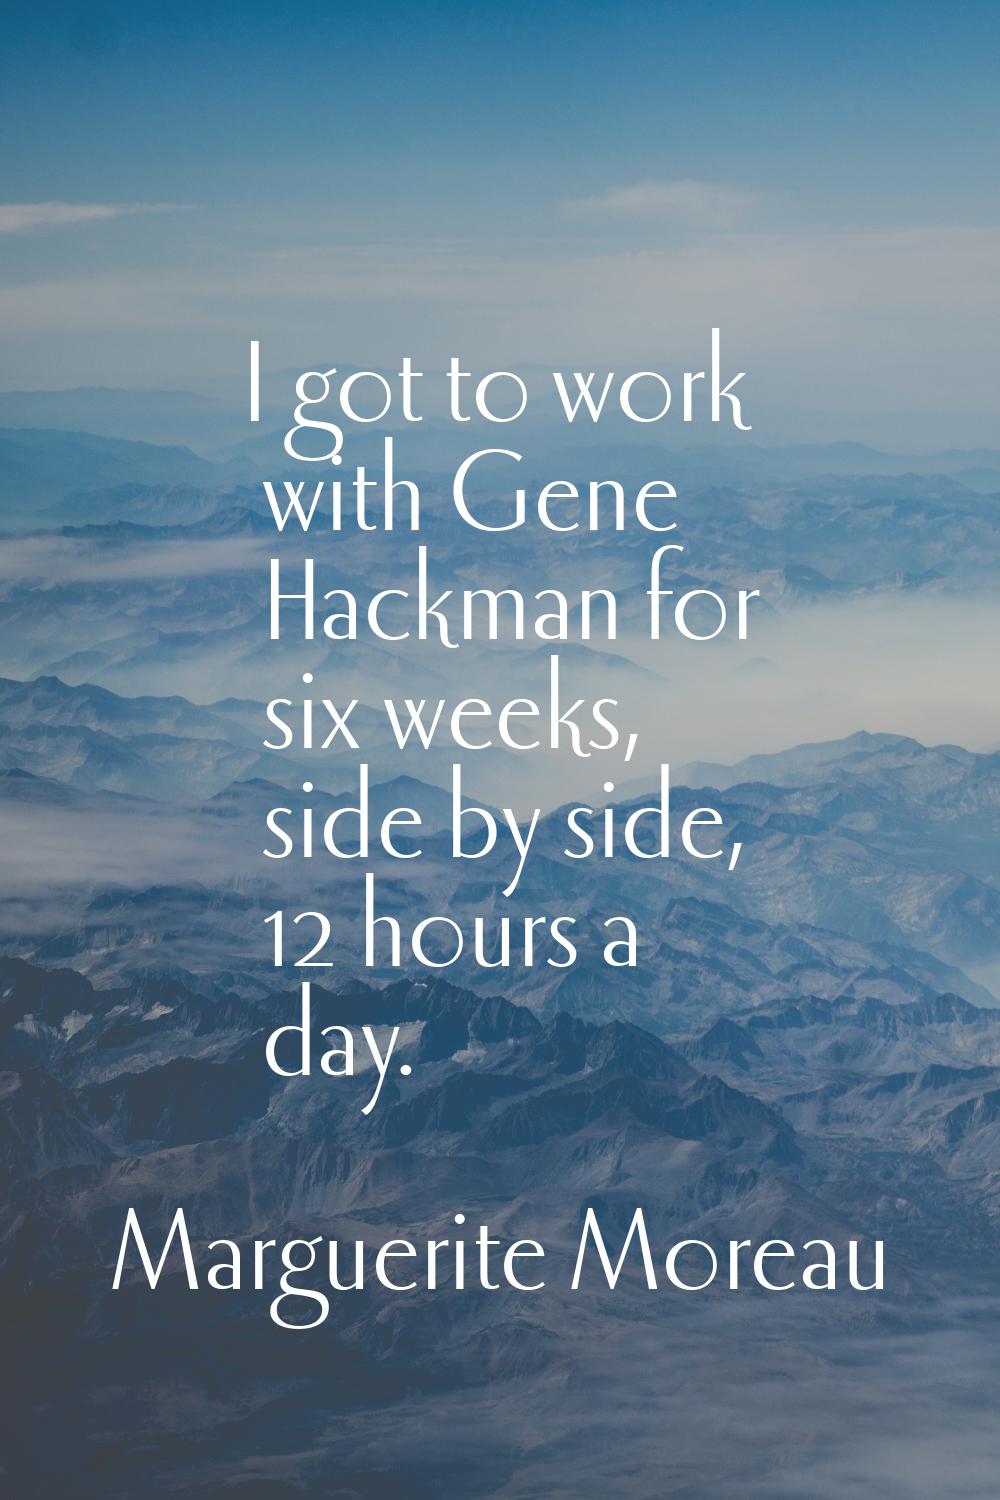 I got to work with Gene Hackman for six weeks, side by side, 12 hours a day.